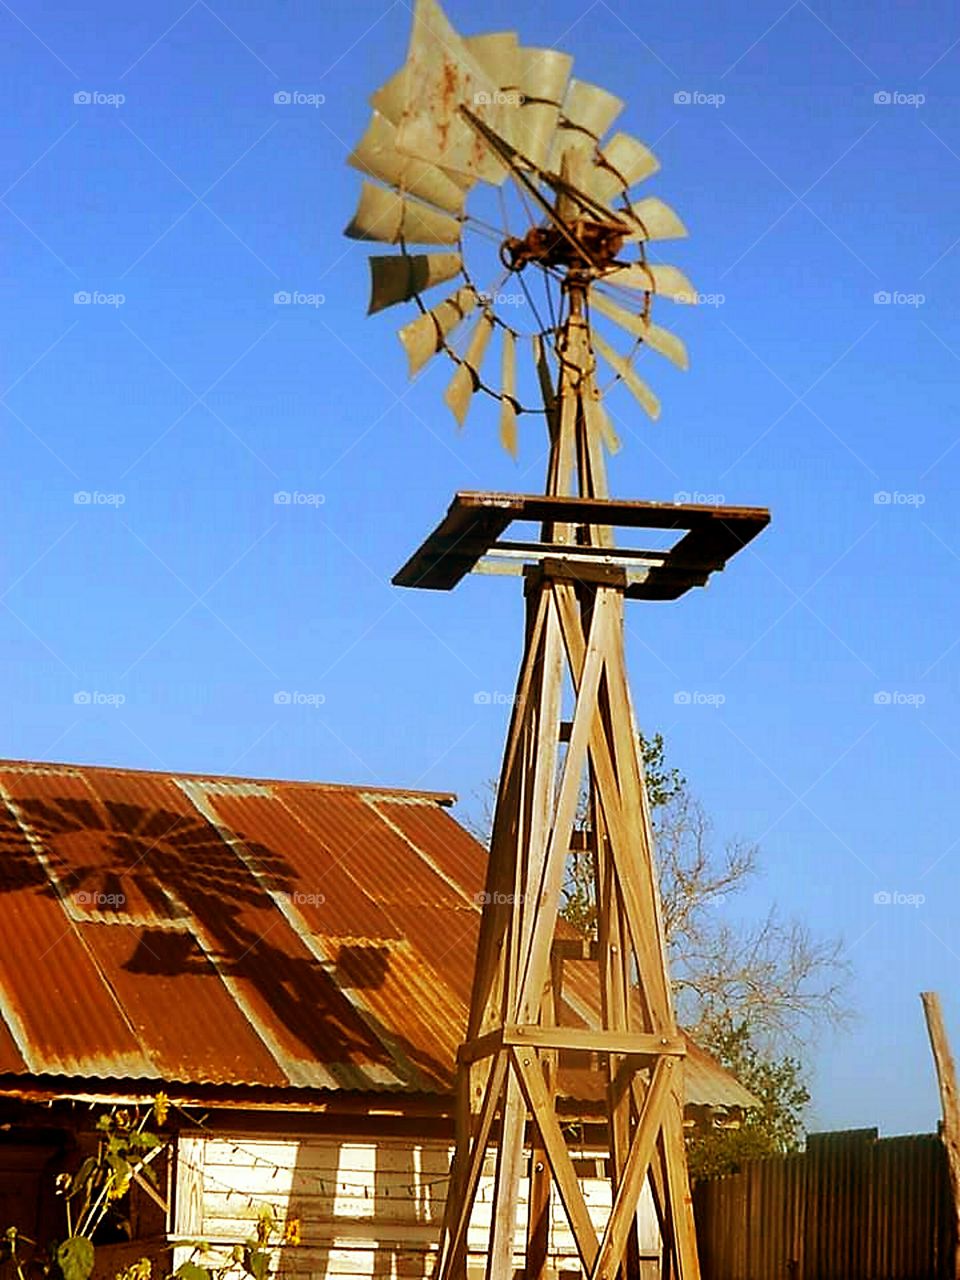 View of old windmill